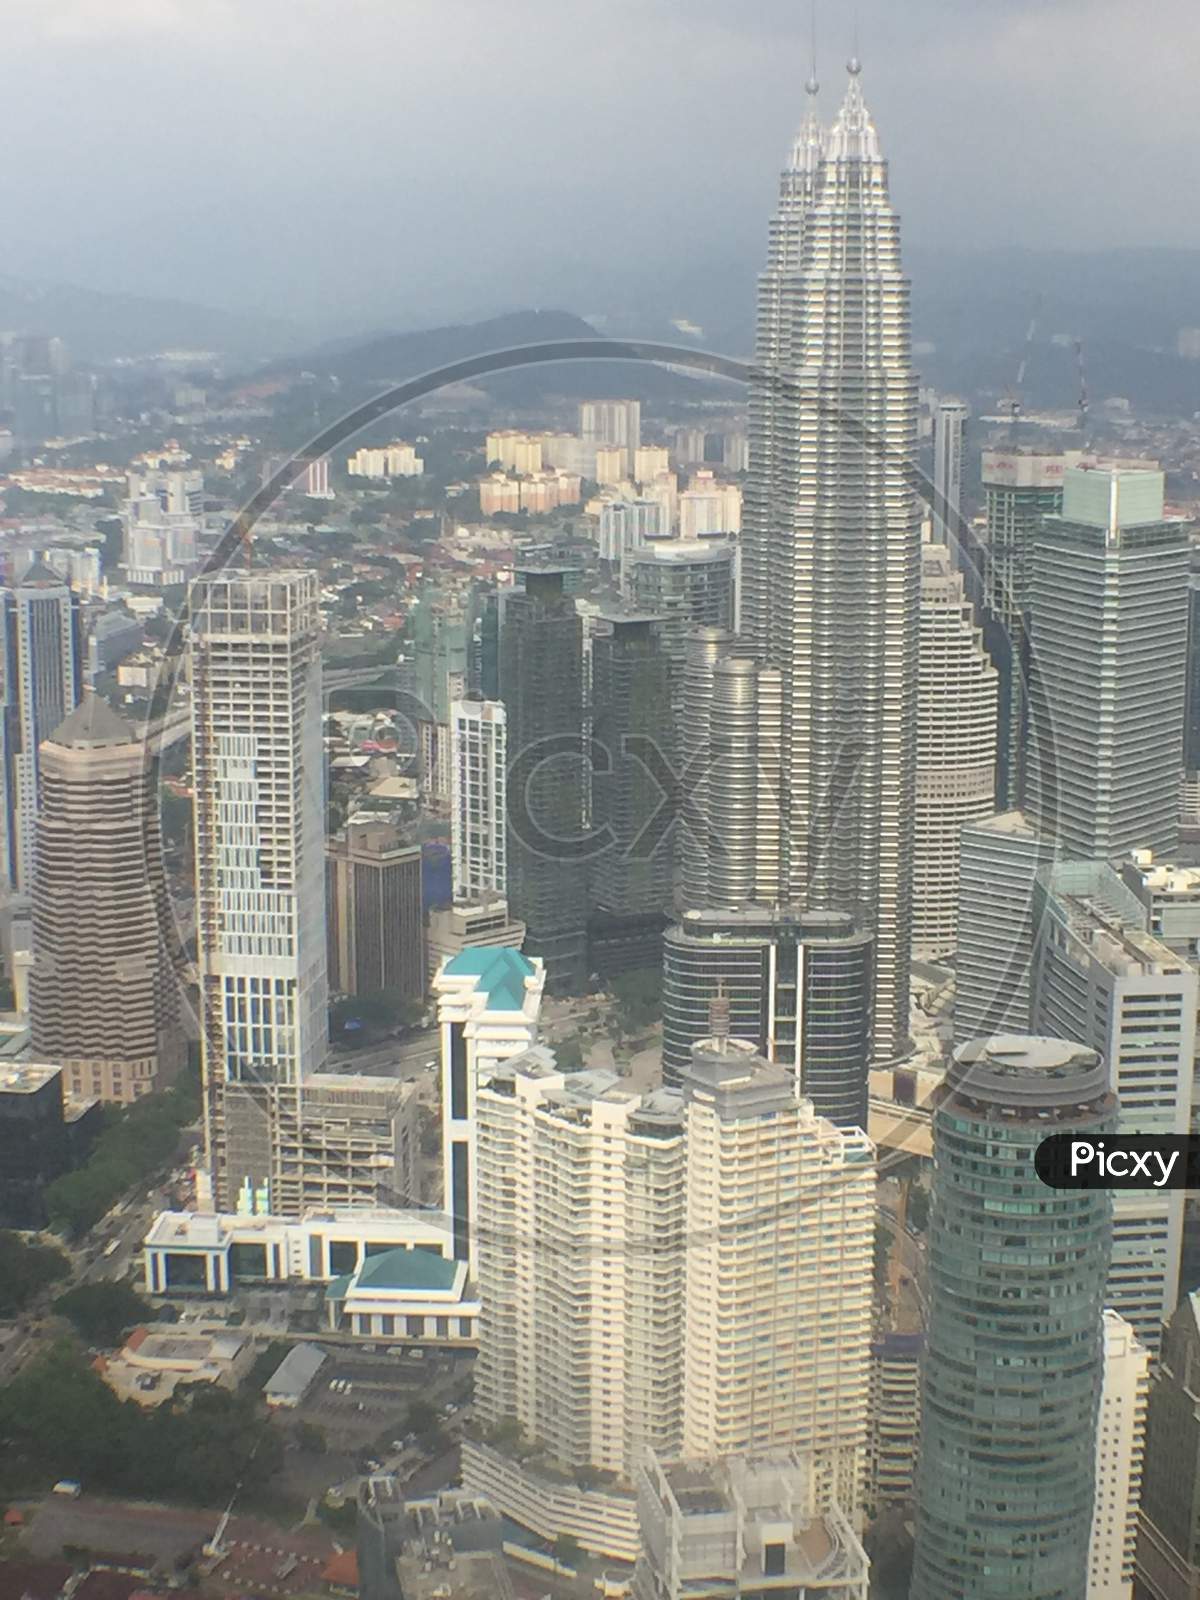 And Birdseye view of Malaysian city landscape and Kuala Lumpur twin towers from side